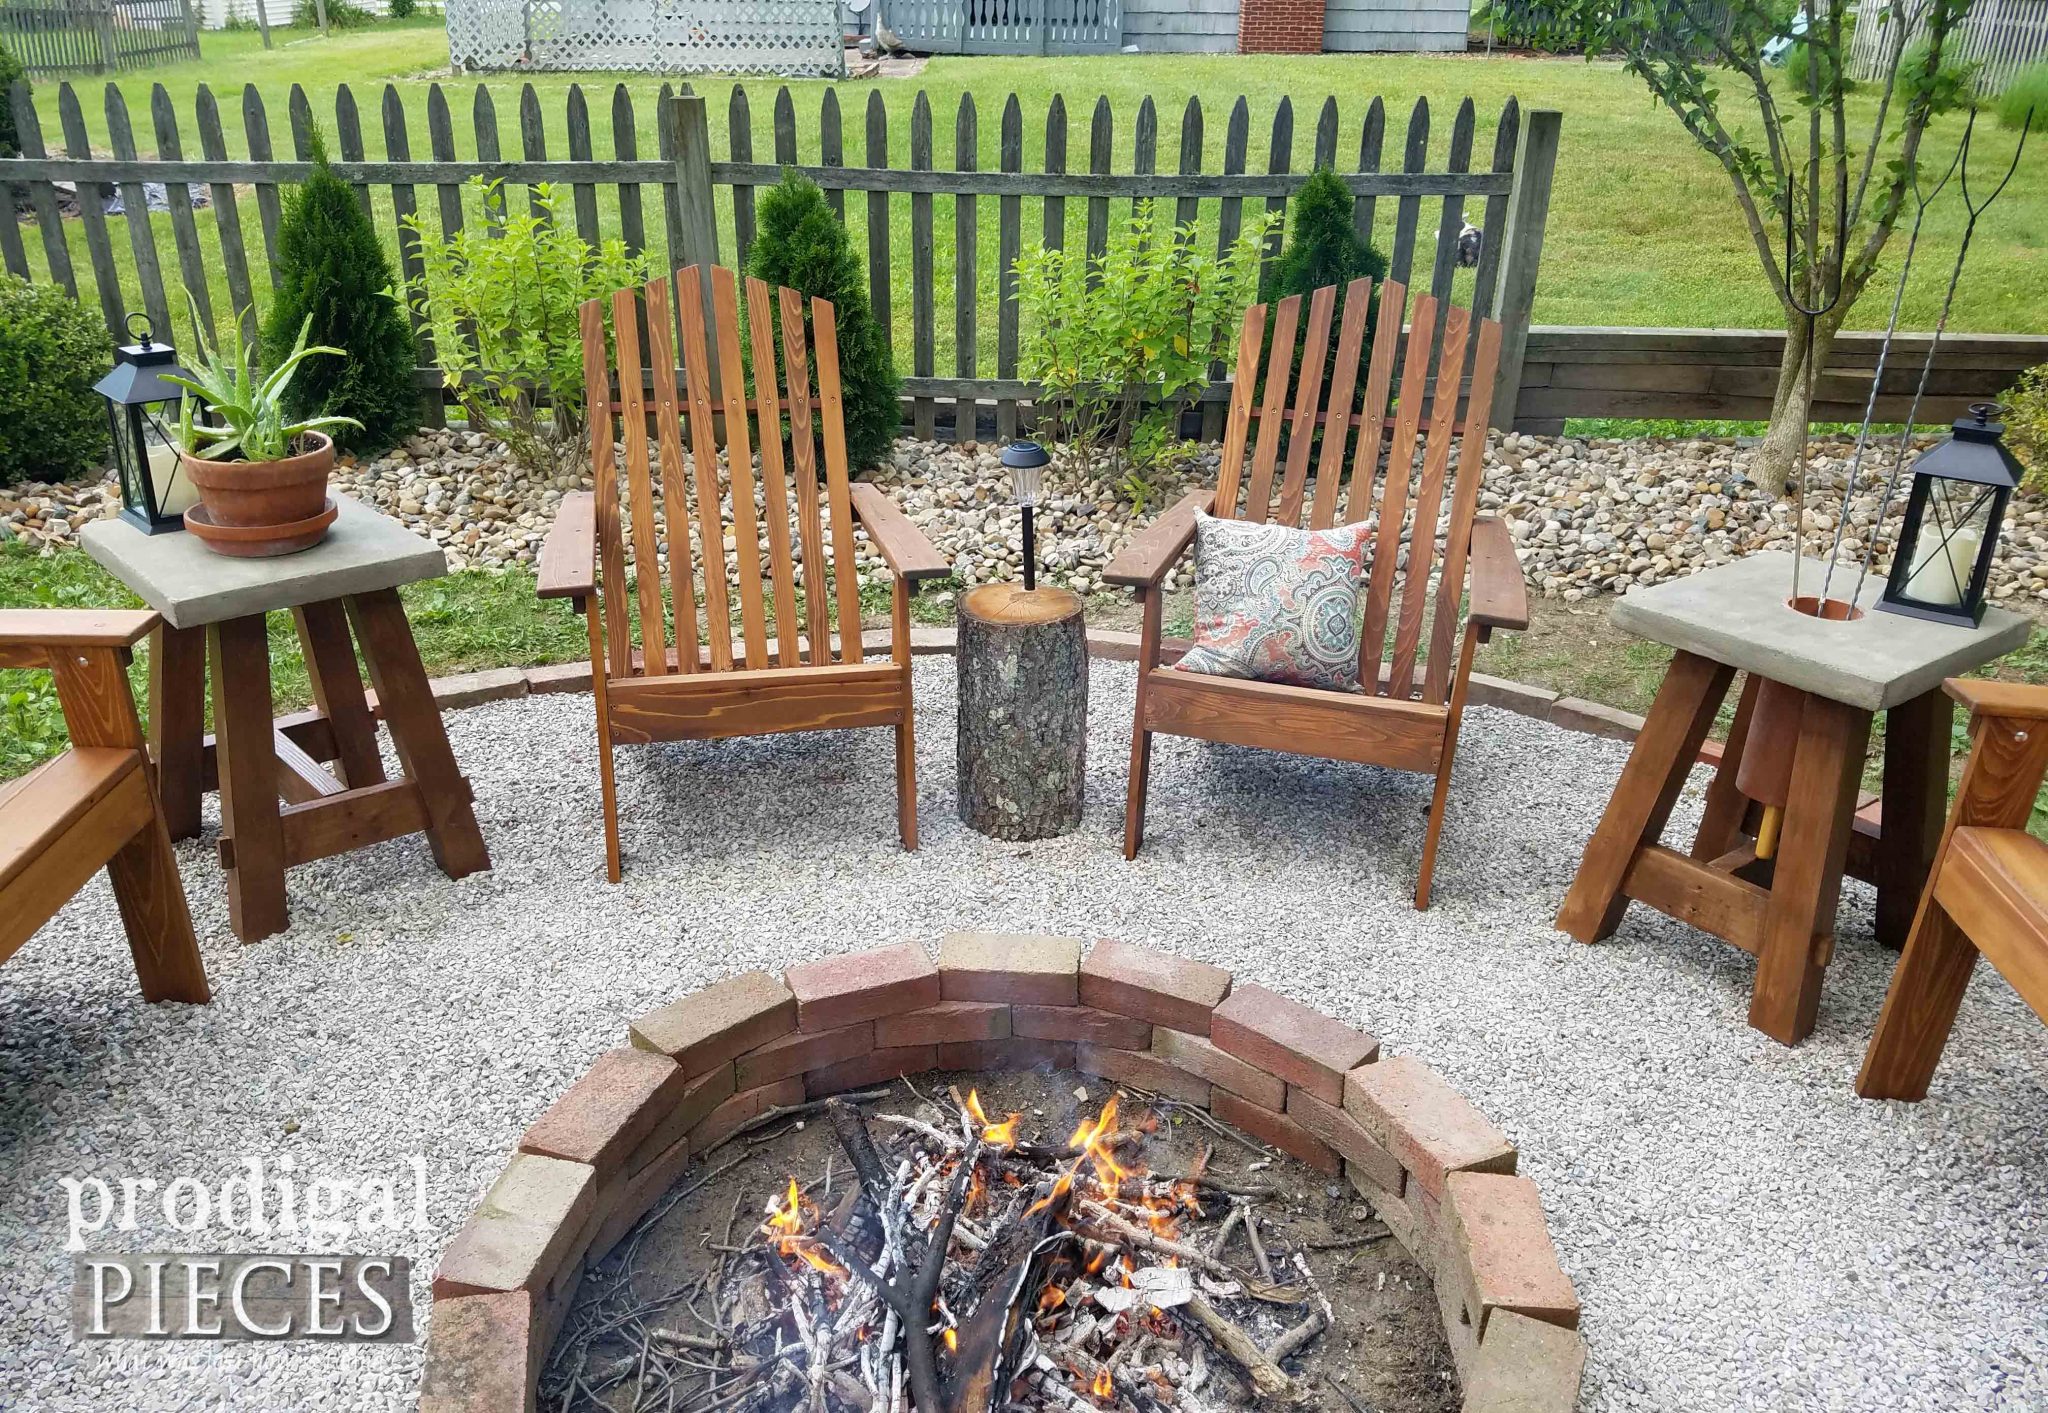 Adirondack Chairs by DFOHome for DIY Fire Pit by Prodigal Pieces | prodigalpieces.com